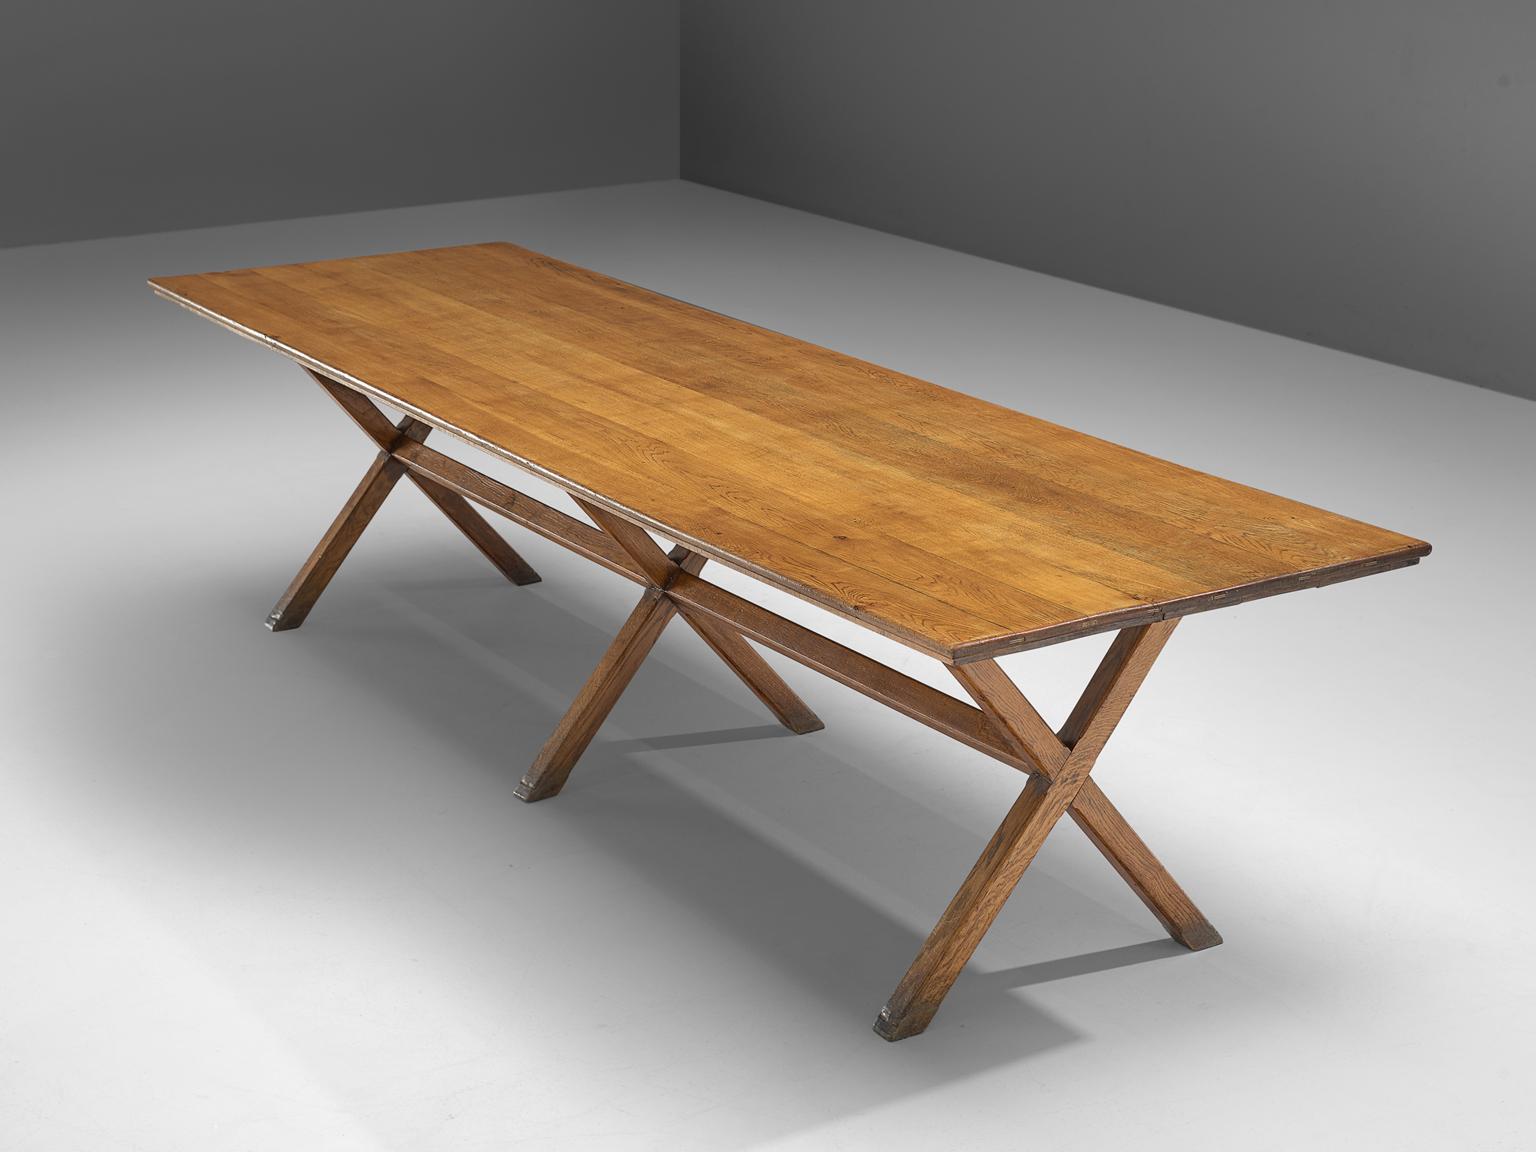 Dining table, solid oak, France, 1960s.

This large dining table is made of solid oak in the 1960s. The table features x-legs which gives the table an architectural appearance, which are slender. The table is robust, yet well-balanced. The table is